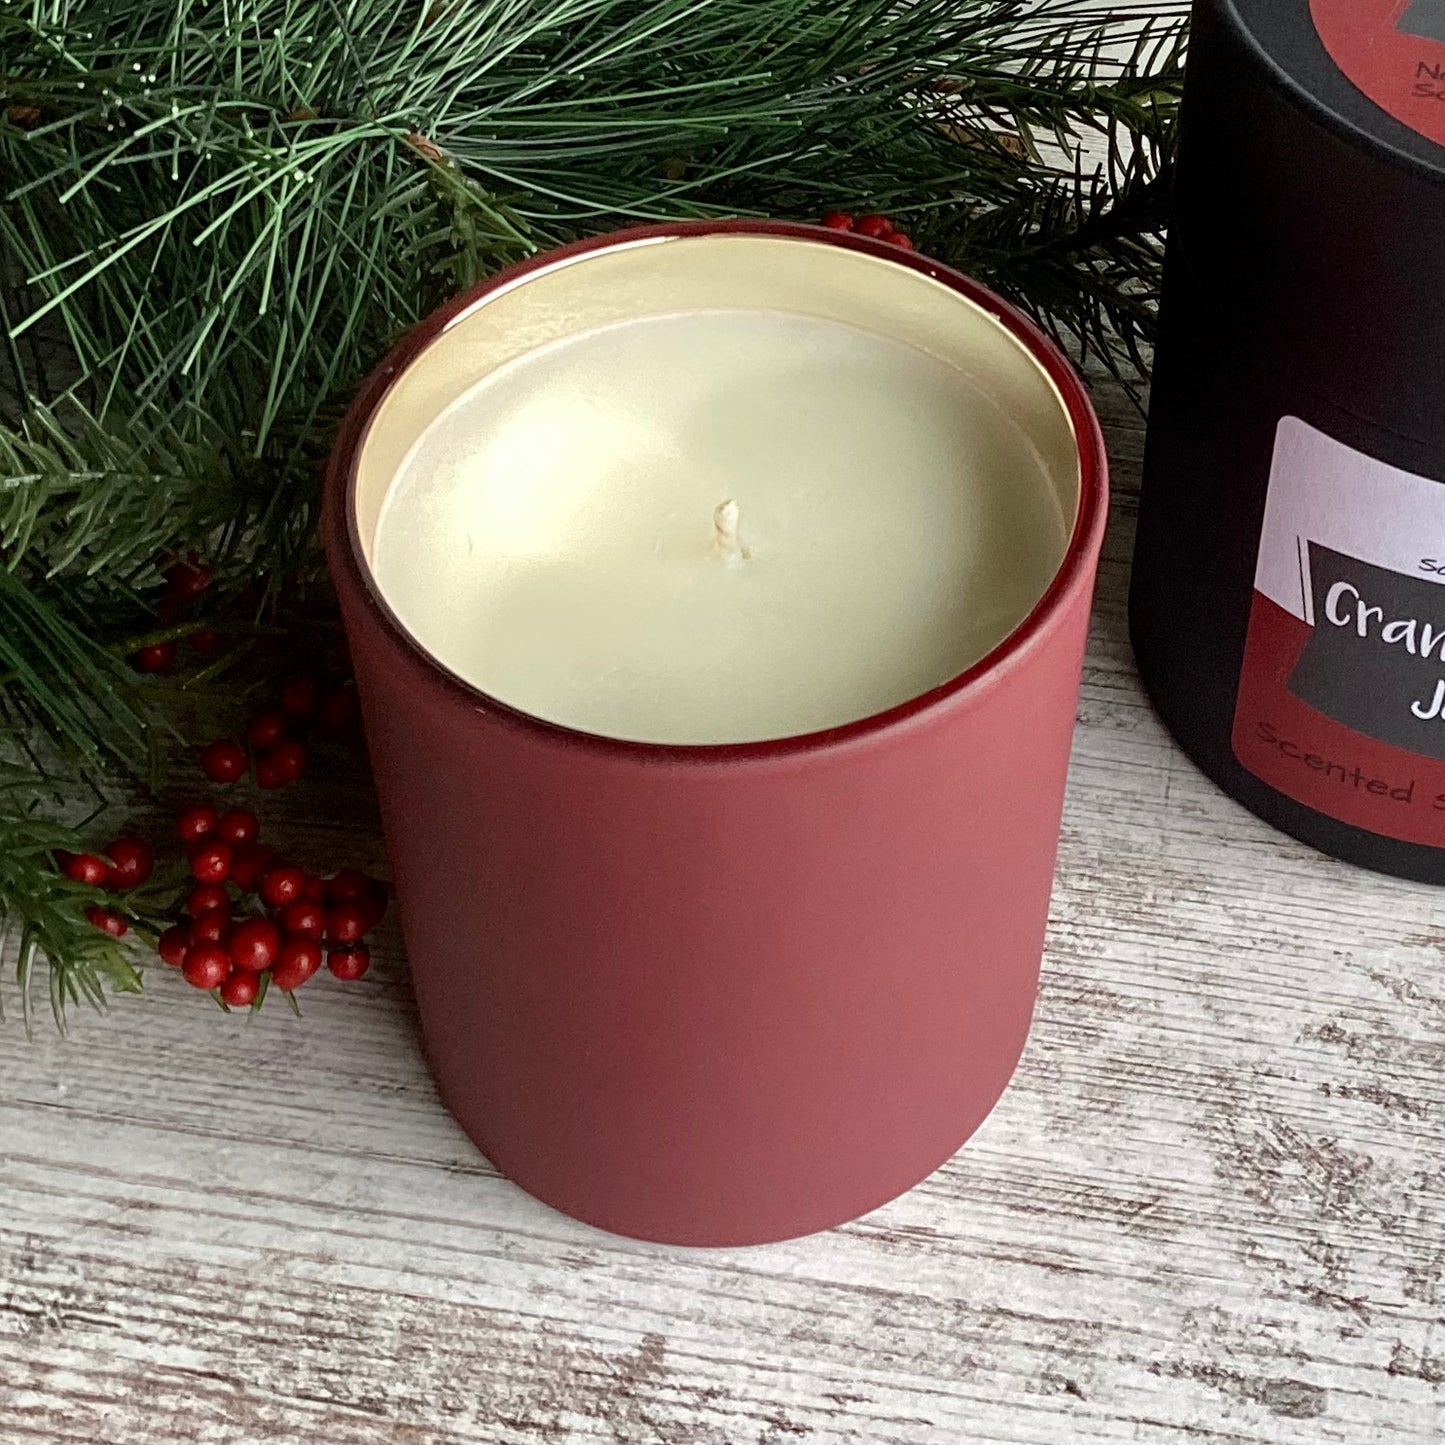 Cran-Apple Jam Soy Candle